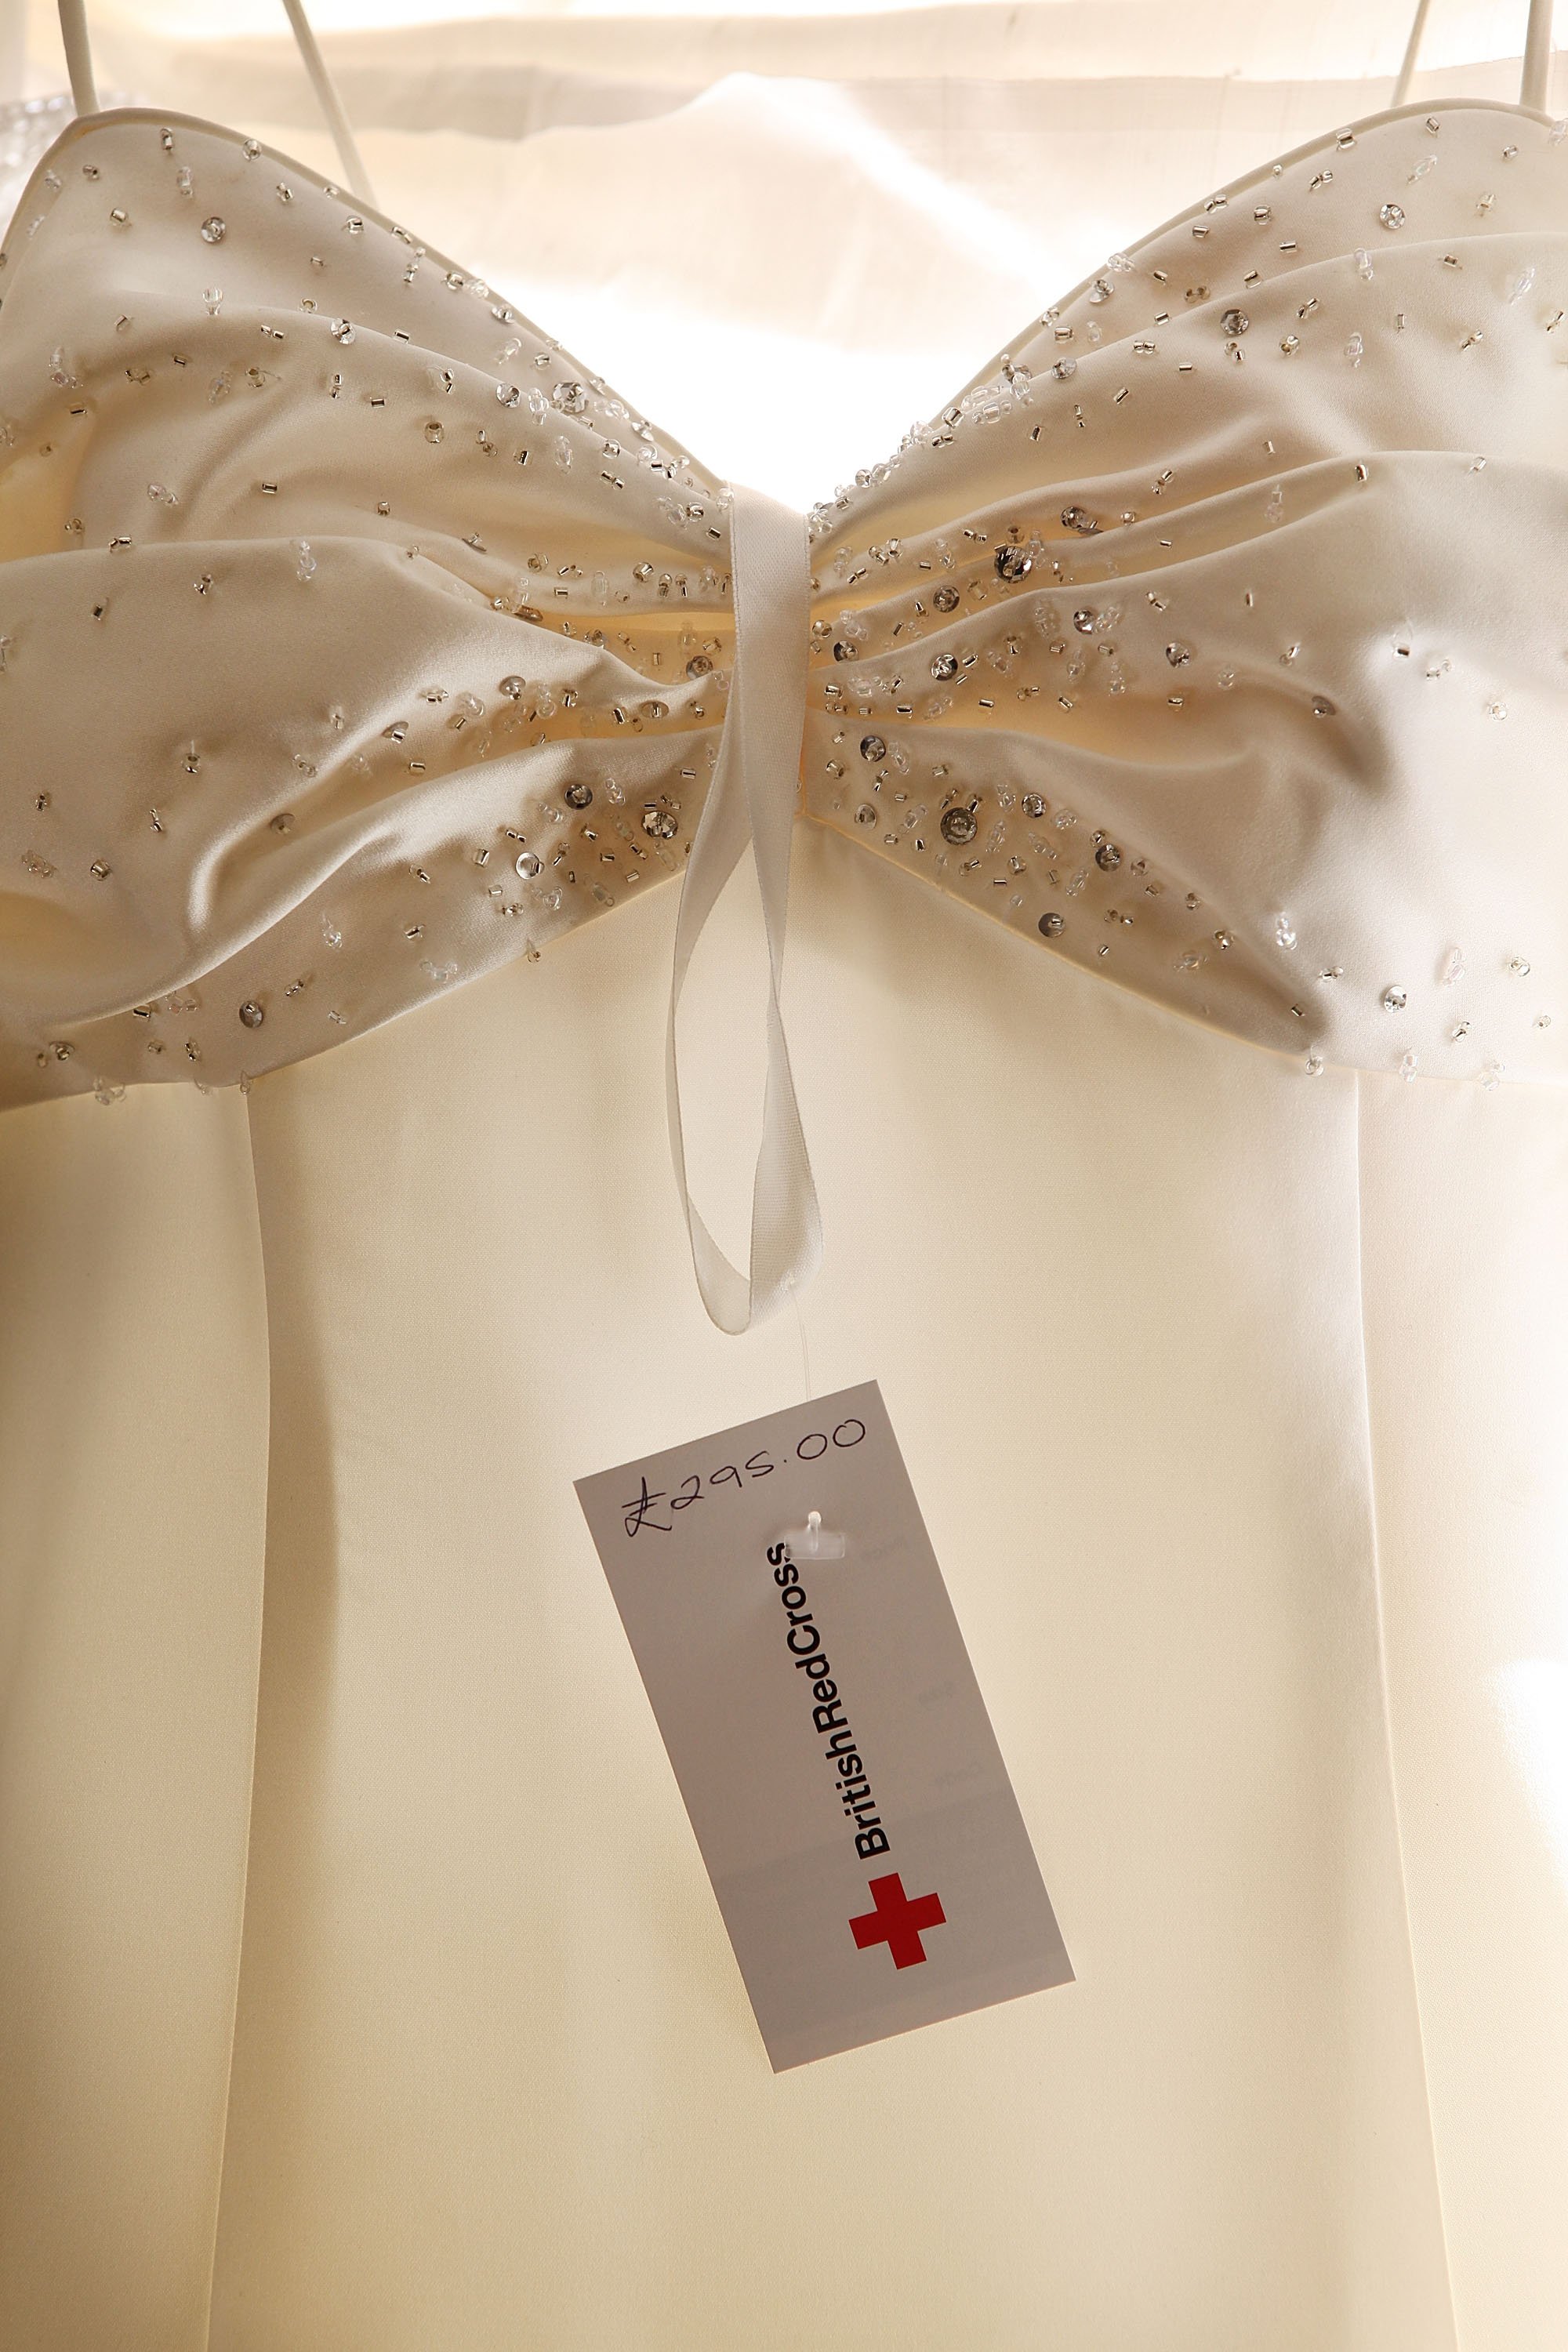 A second hand wedding dress at the Red Cross charity bridal shop on February 21, 2009, in Dorking, England. | Source: Getty Images